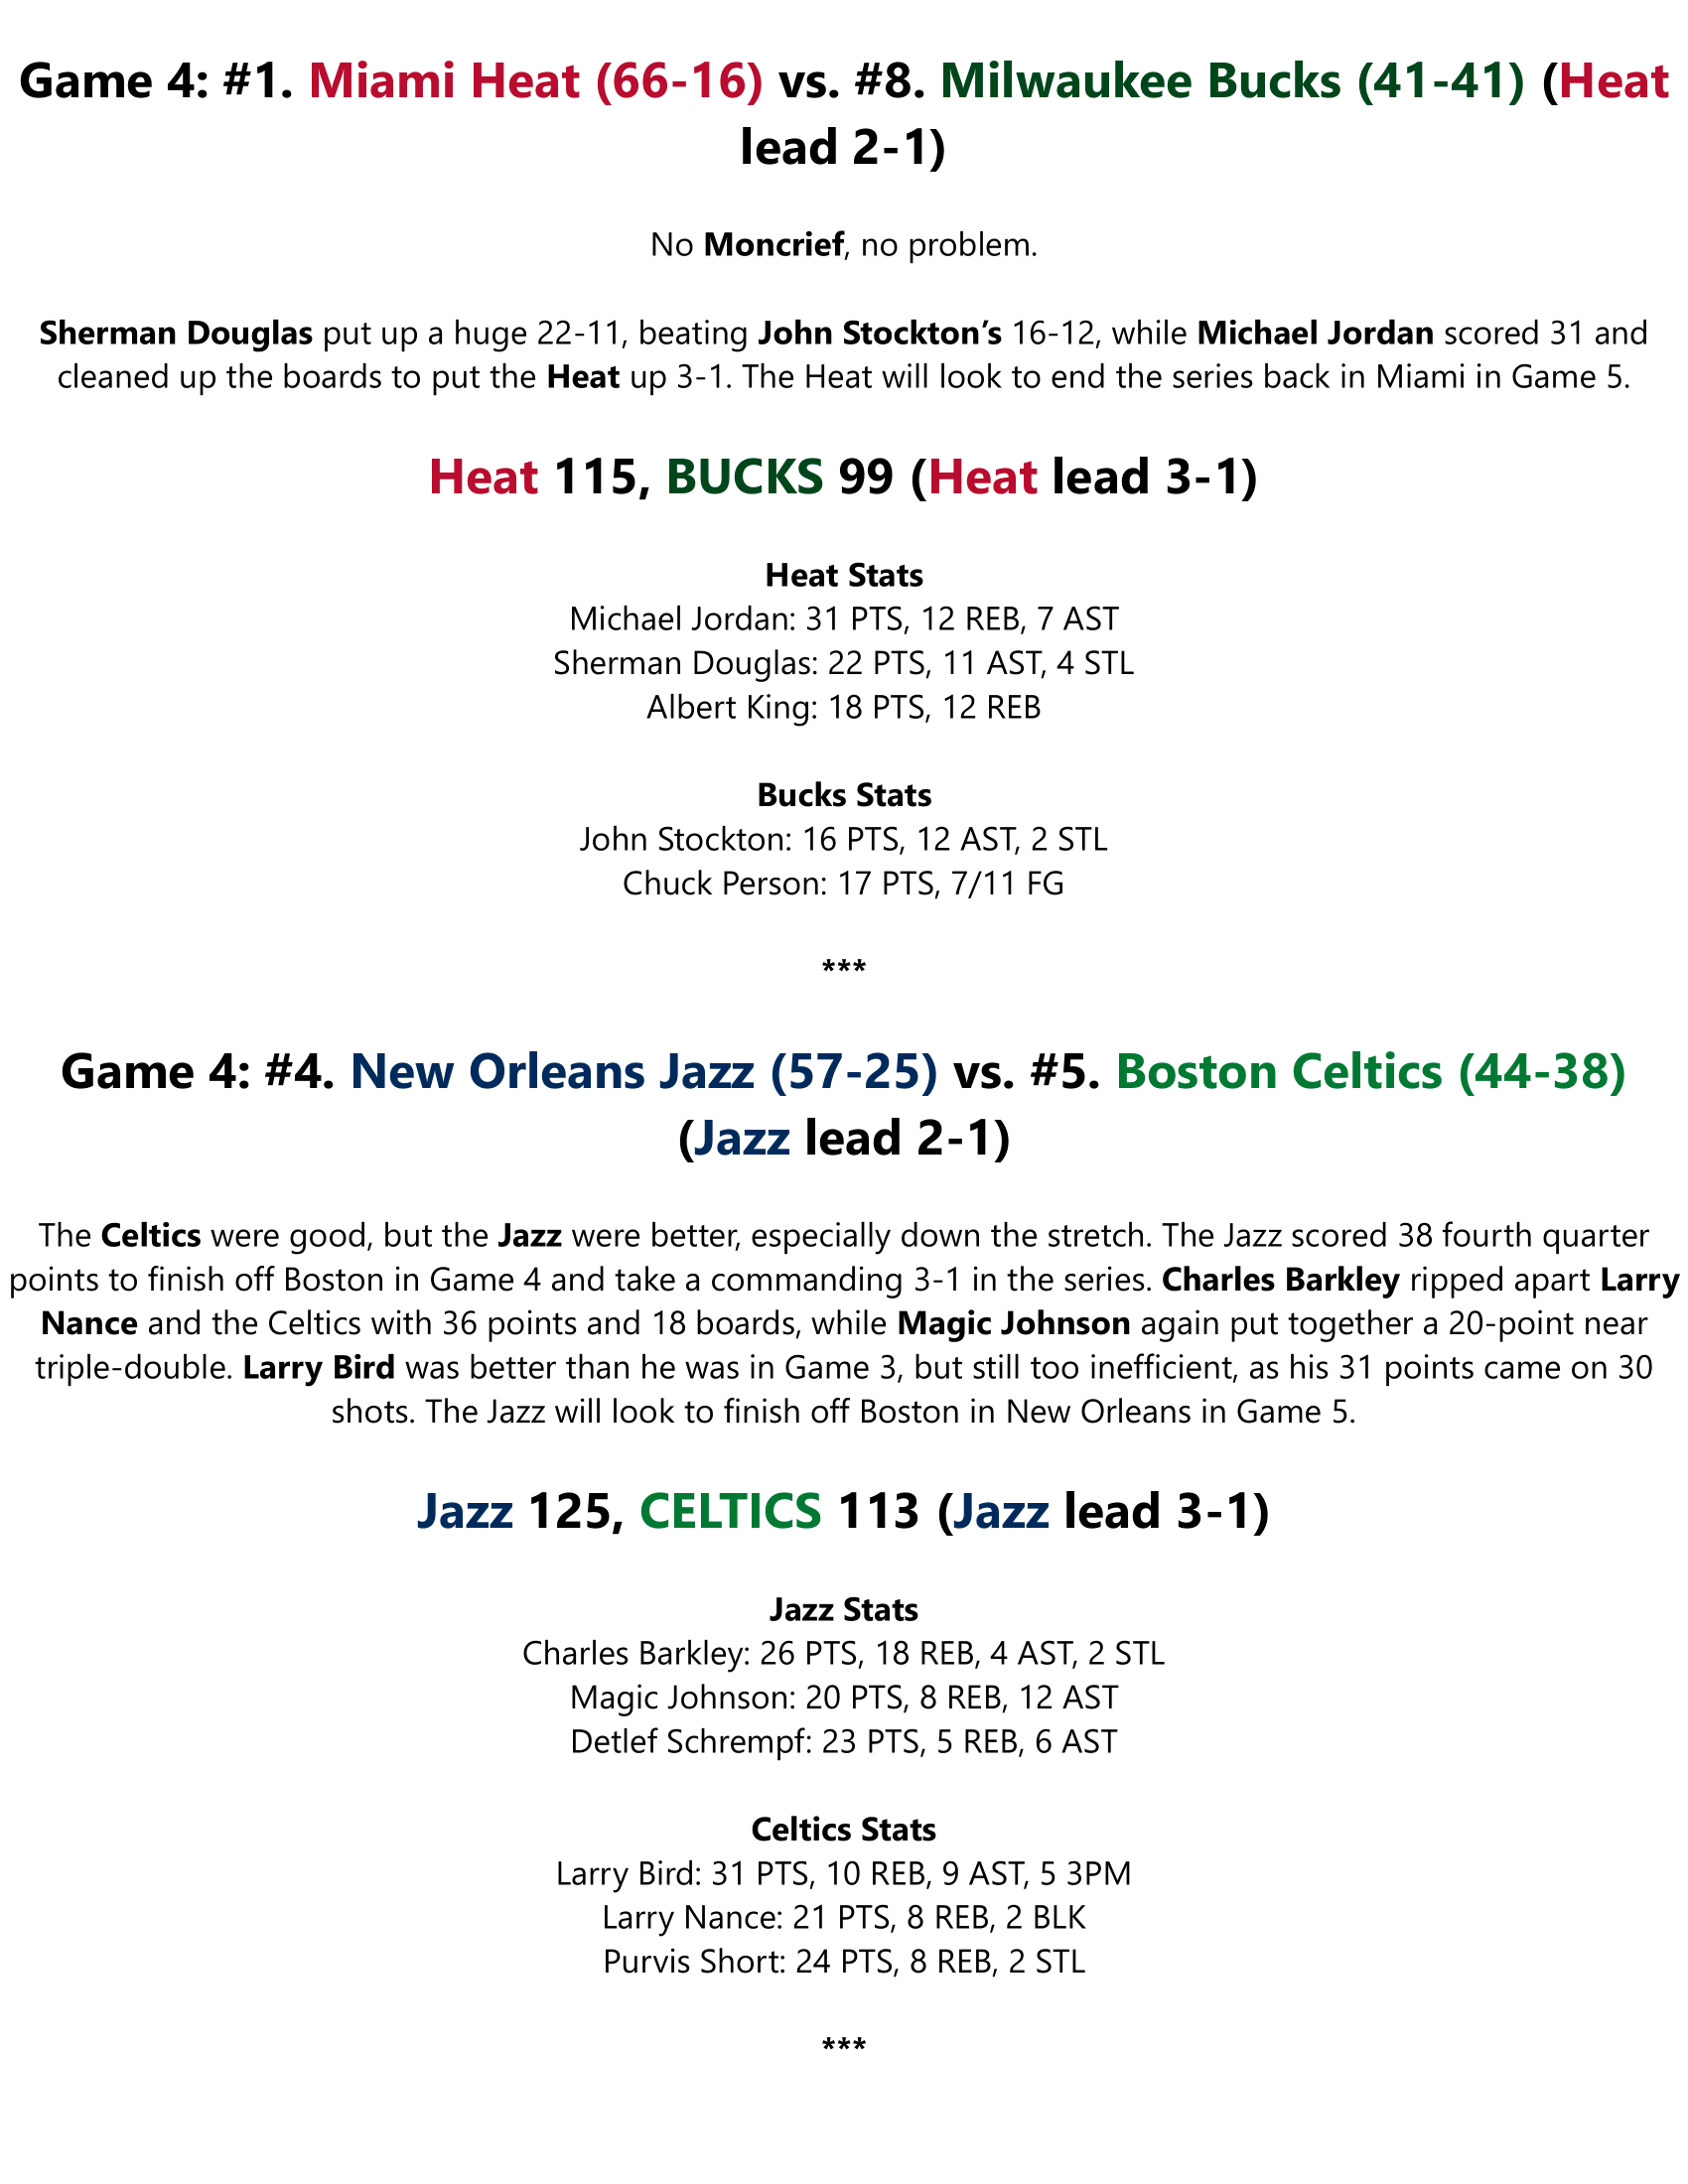 89-90-Part-5-Round-1-Semi-Preview-15.png